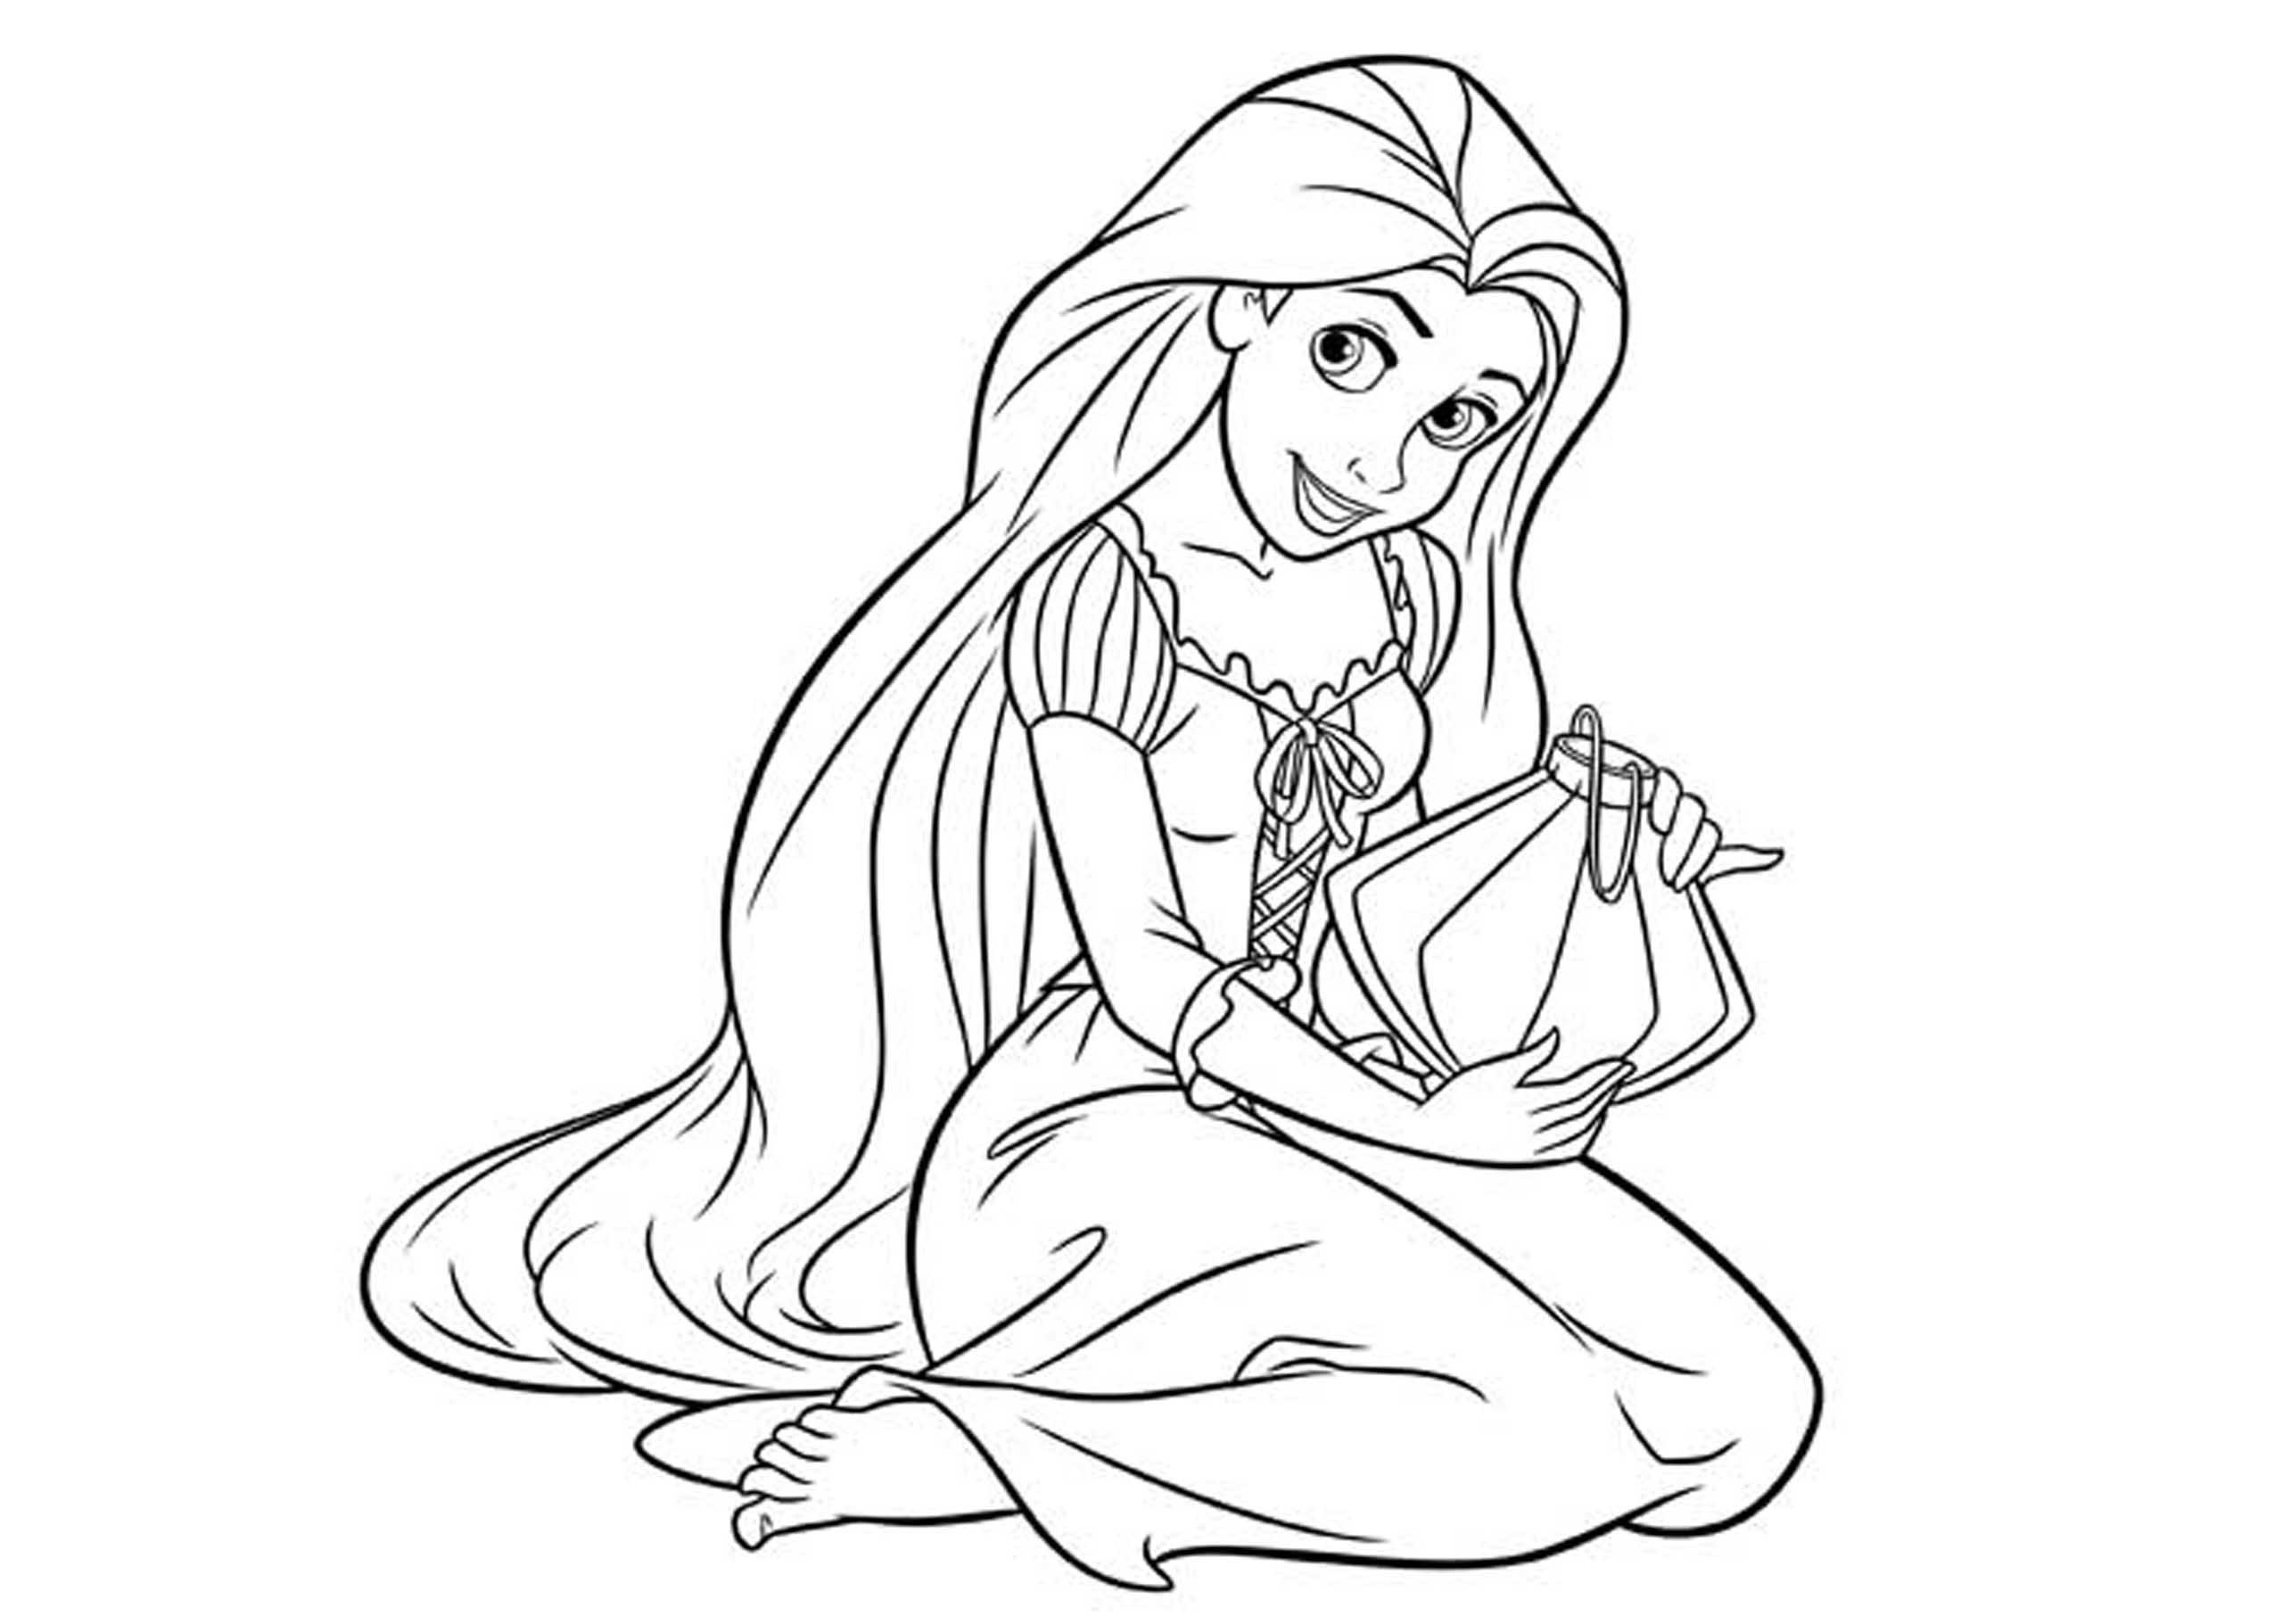 Princess Coloring Pages You Can Print - BubaKids.com